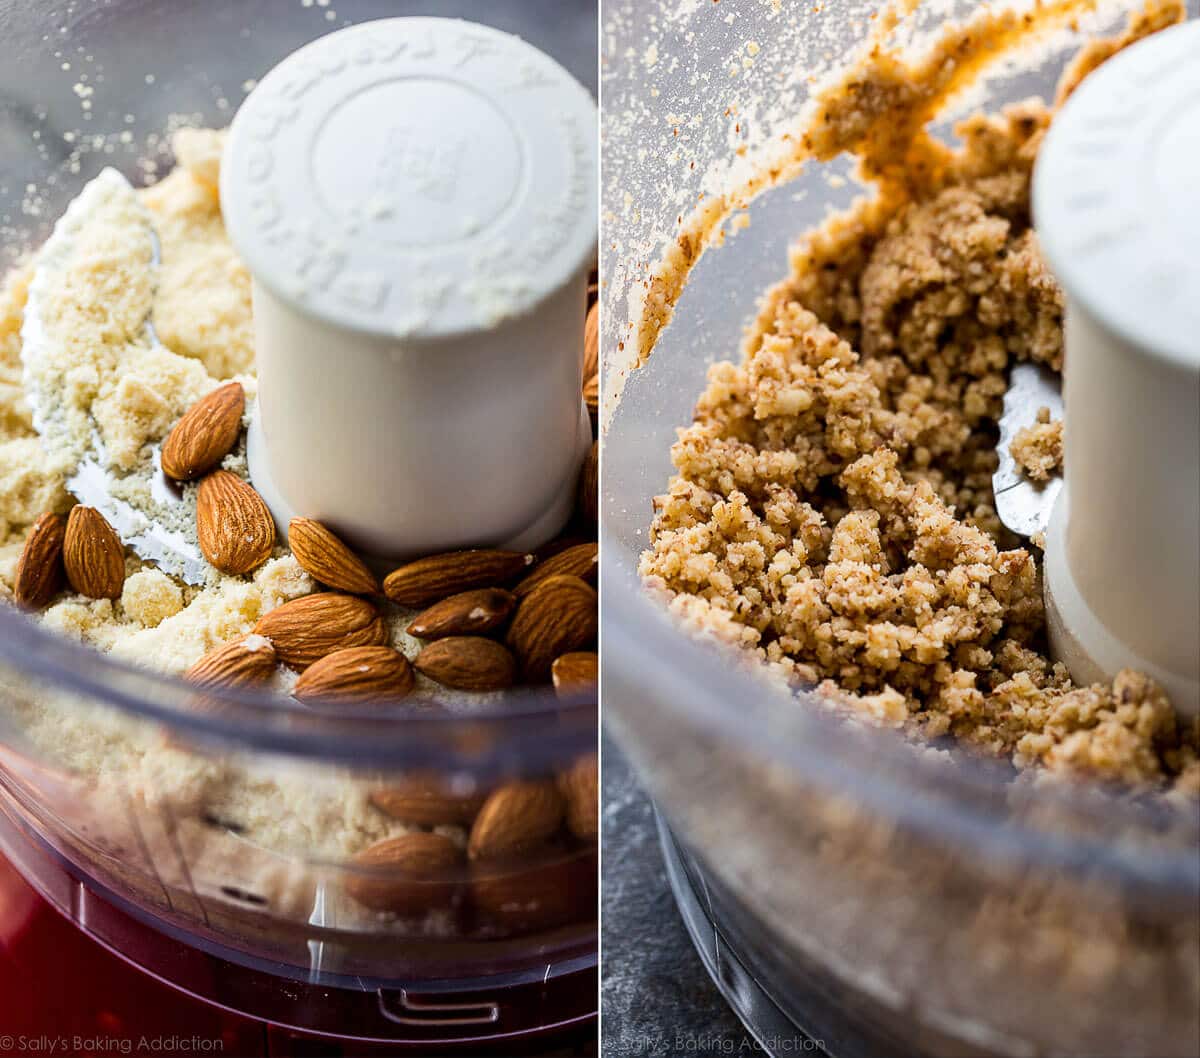 2 images of almonds and almond flour in a food processor and crust mixture in food processor after pulsing